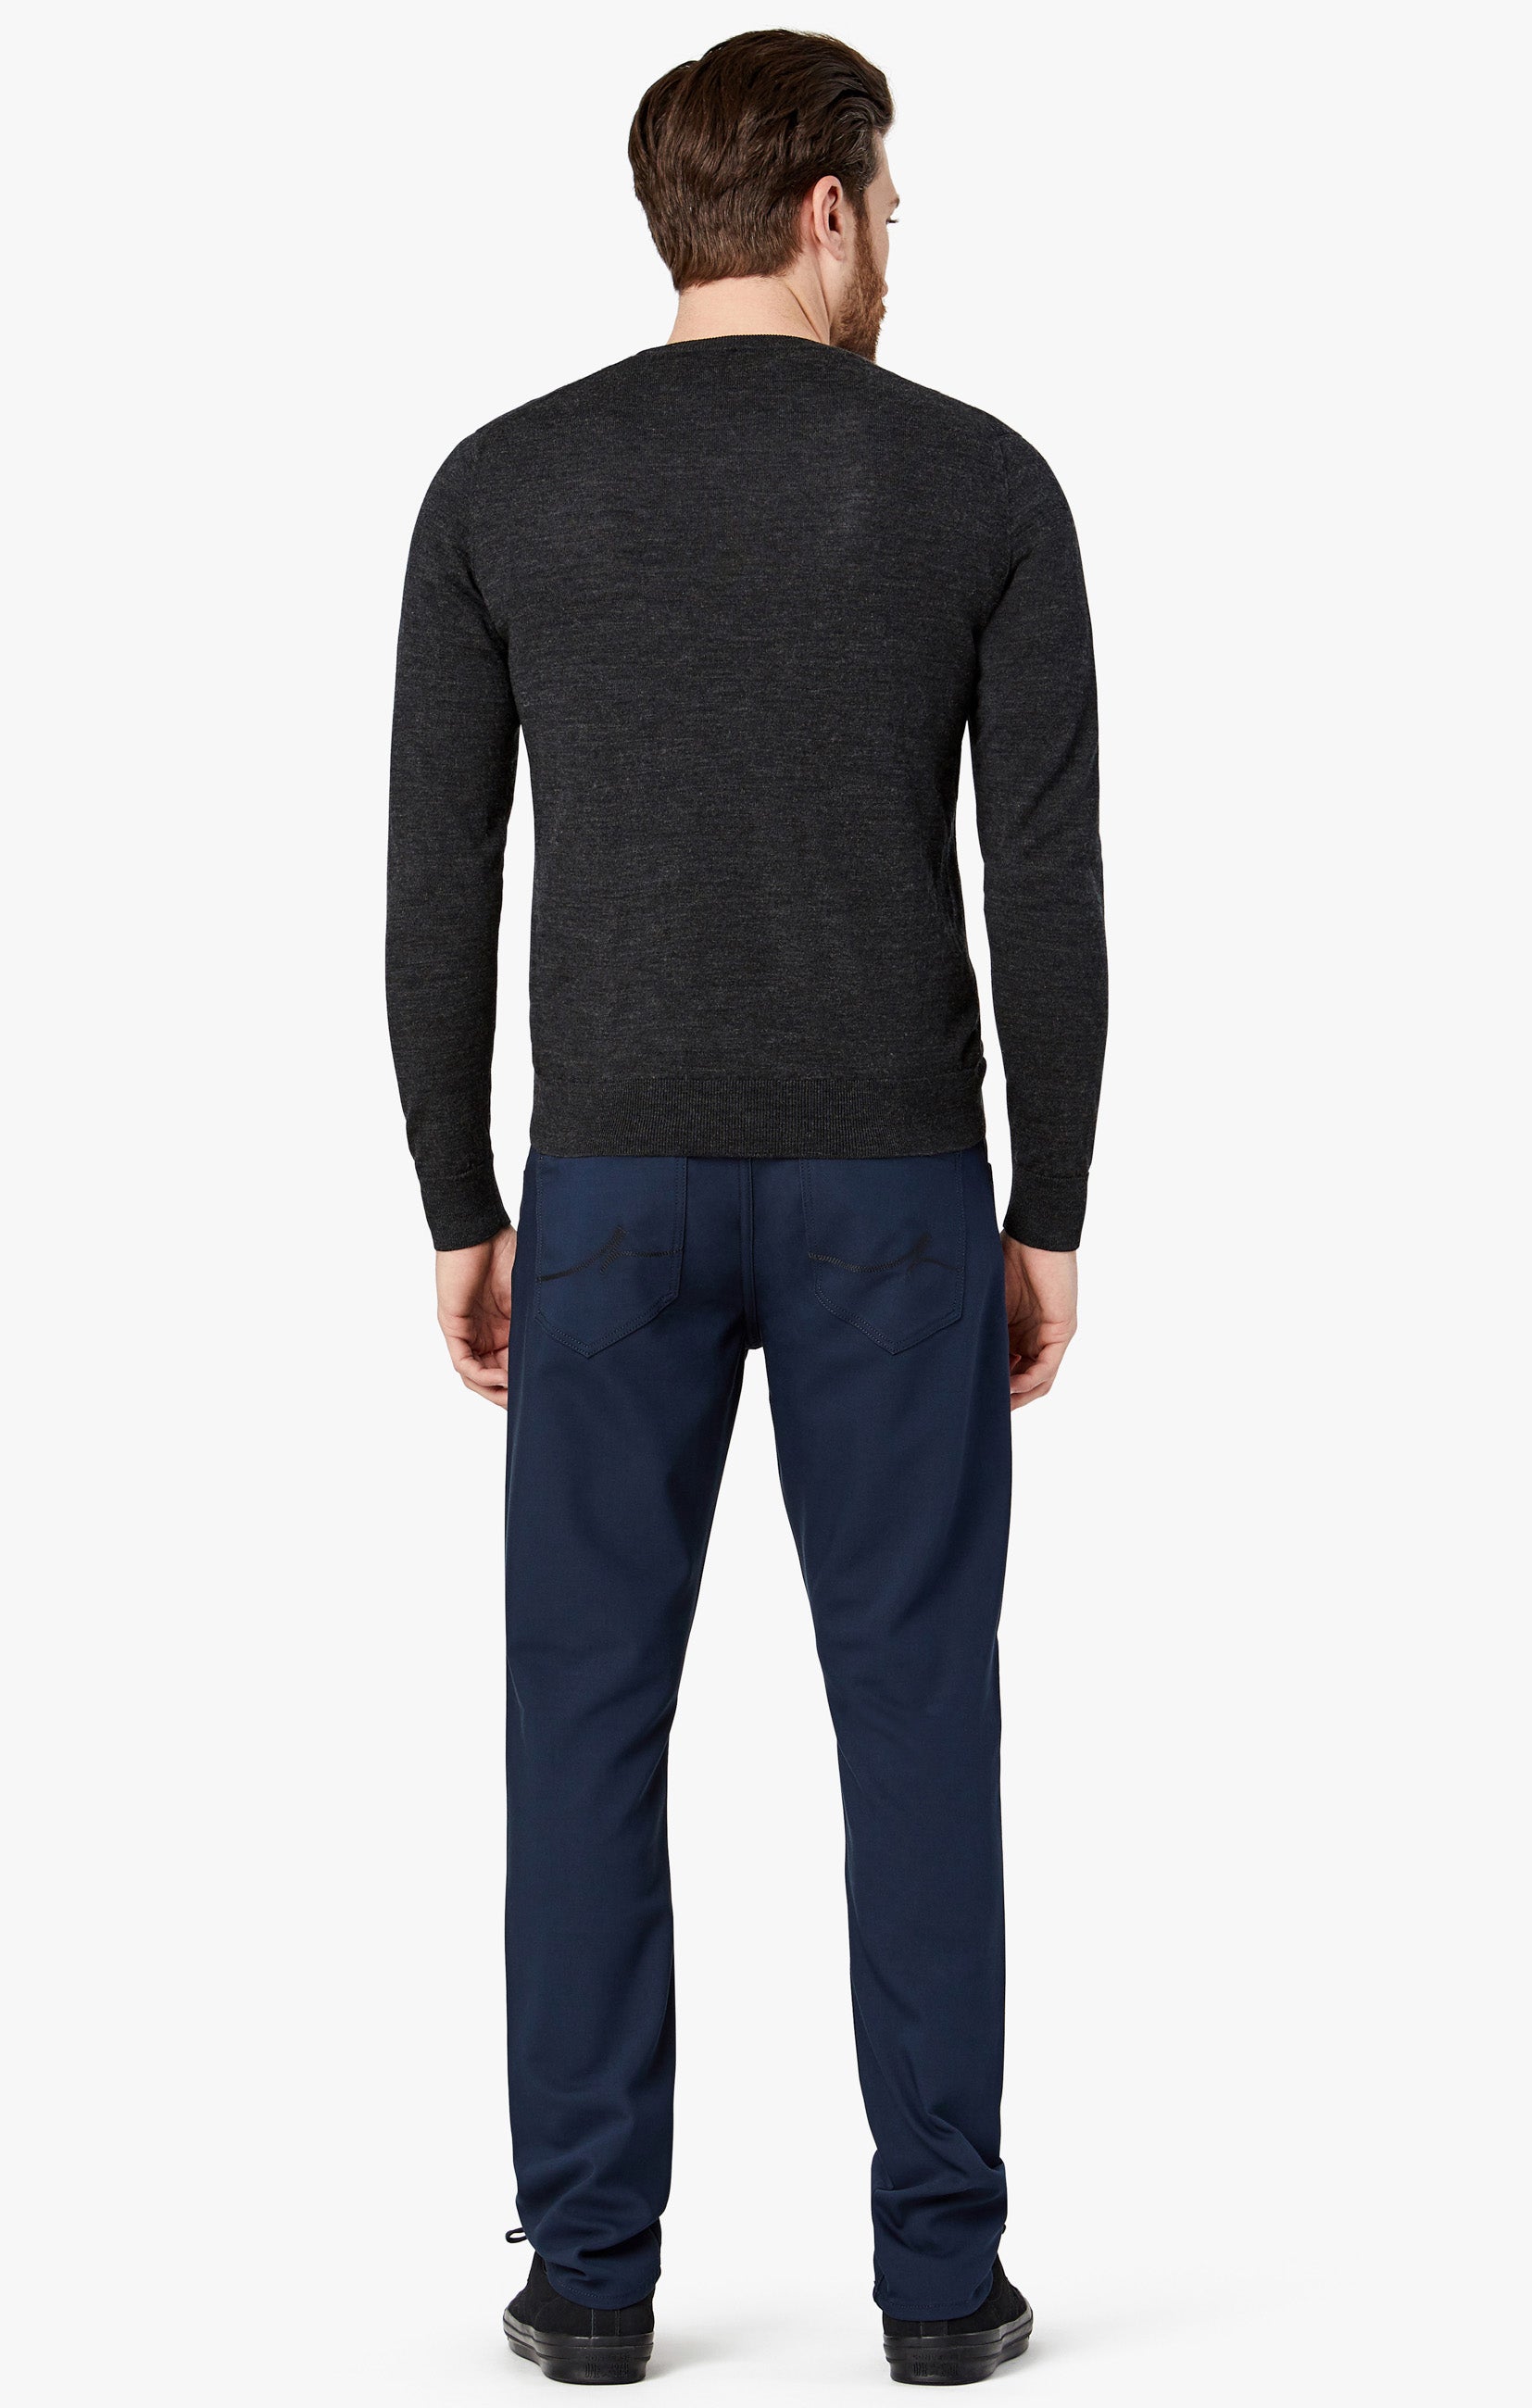 Courage Straight Leg Pants in Navy Commuter Image 4